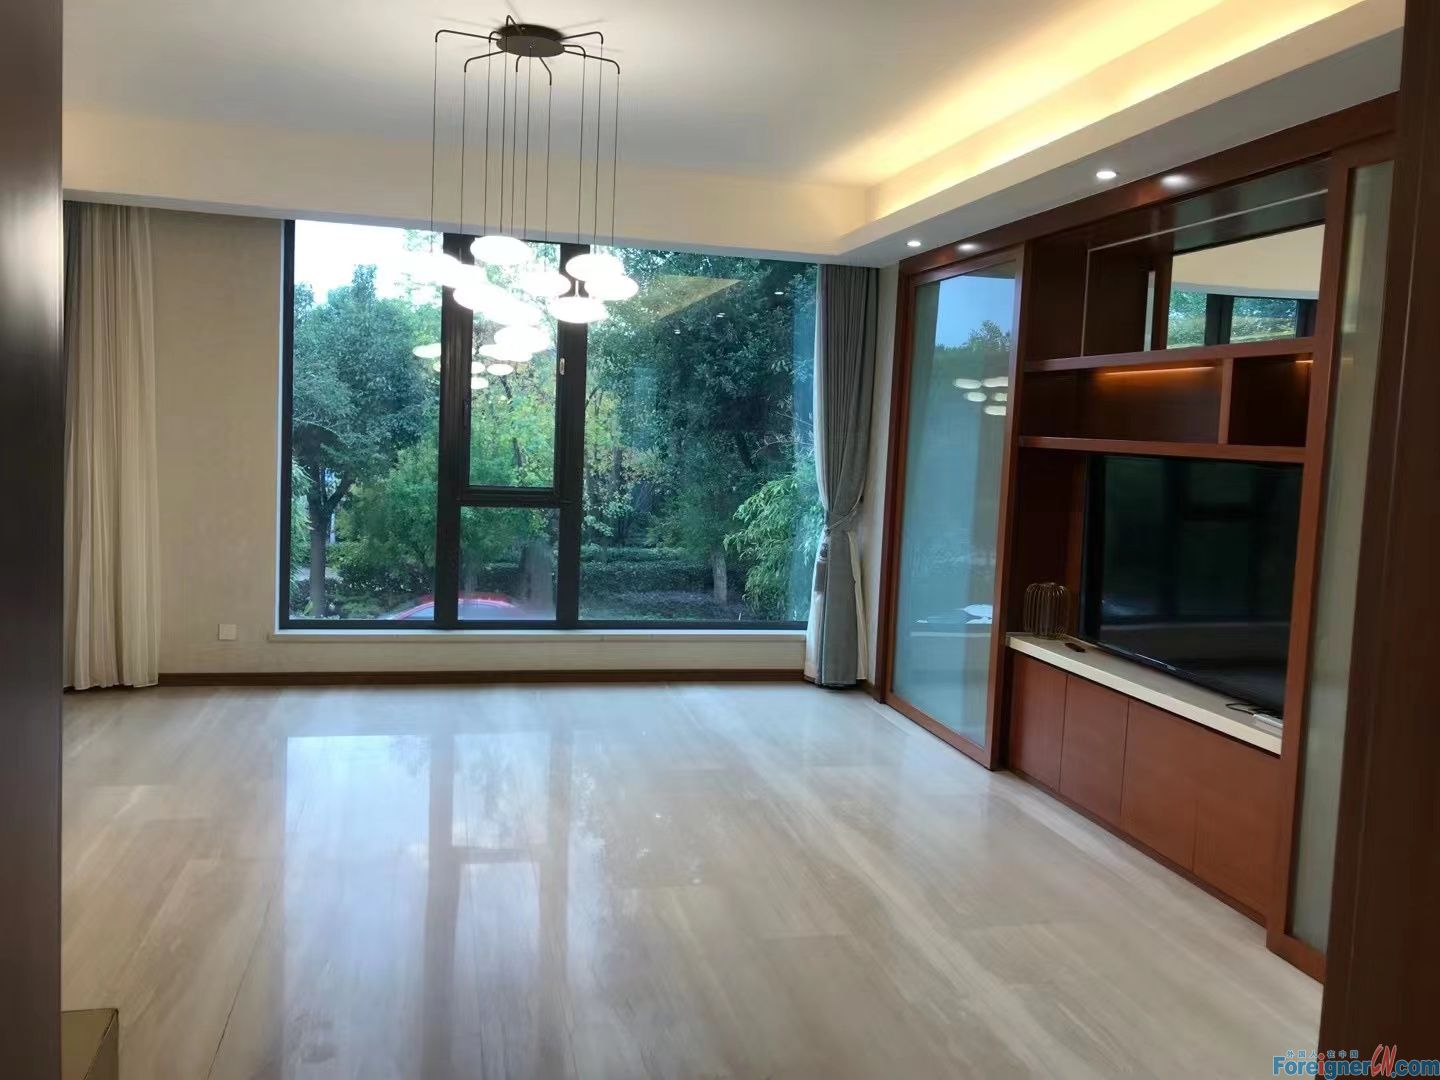 Excellent!! big house 358Sqm for rent /Marina Cove Garden in Suzhou/floor heating&ceatral AC/Jinji Lake nearby/Metro